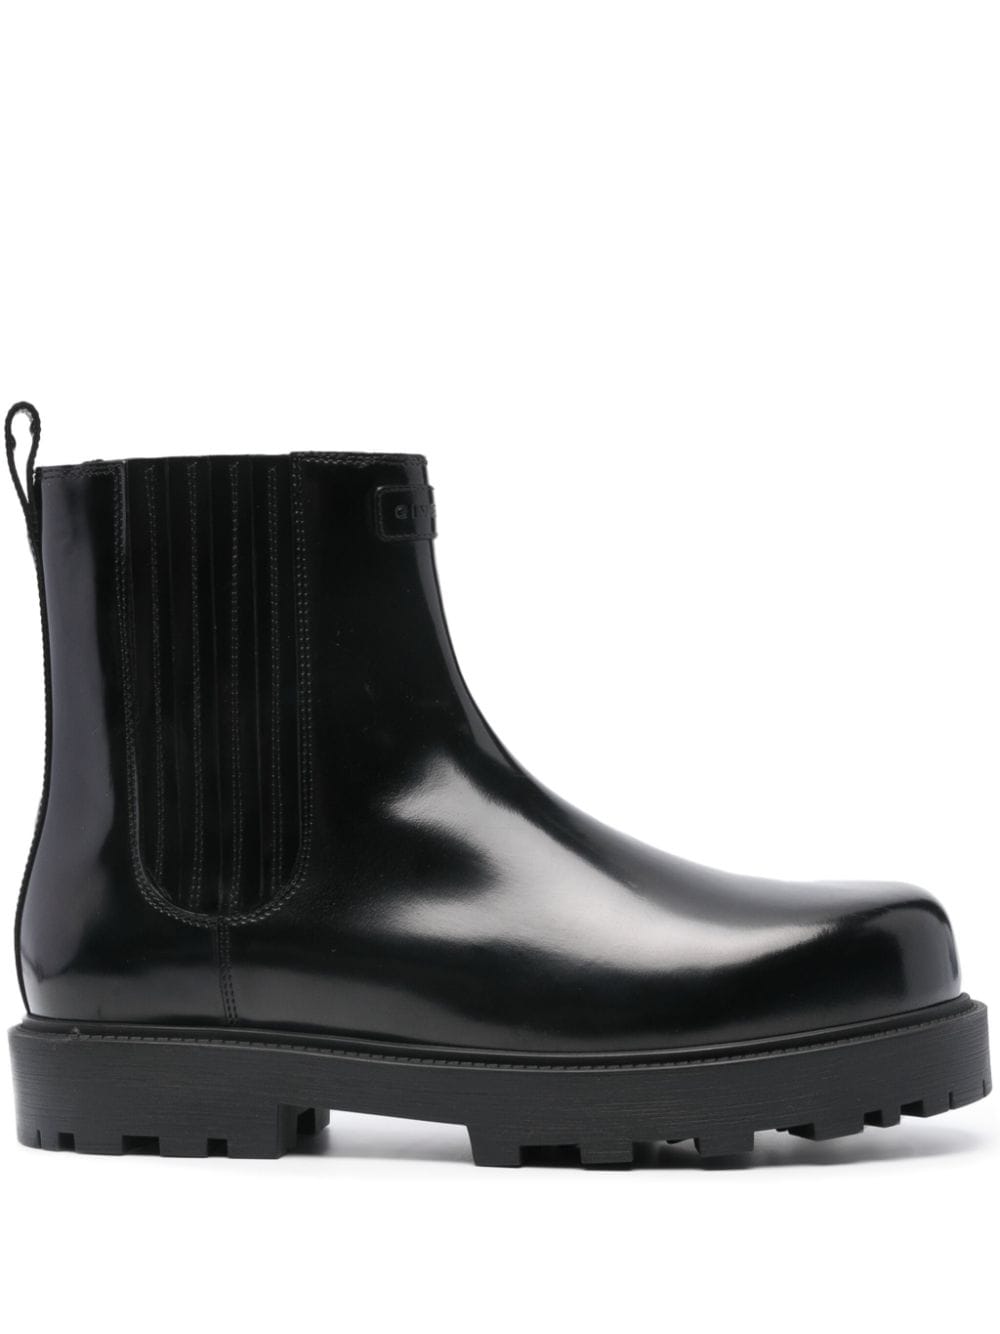 Givenchy patent leather Chelsea boots - Black von Givenchy